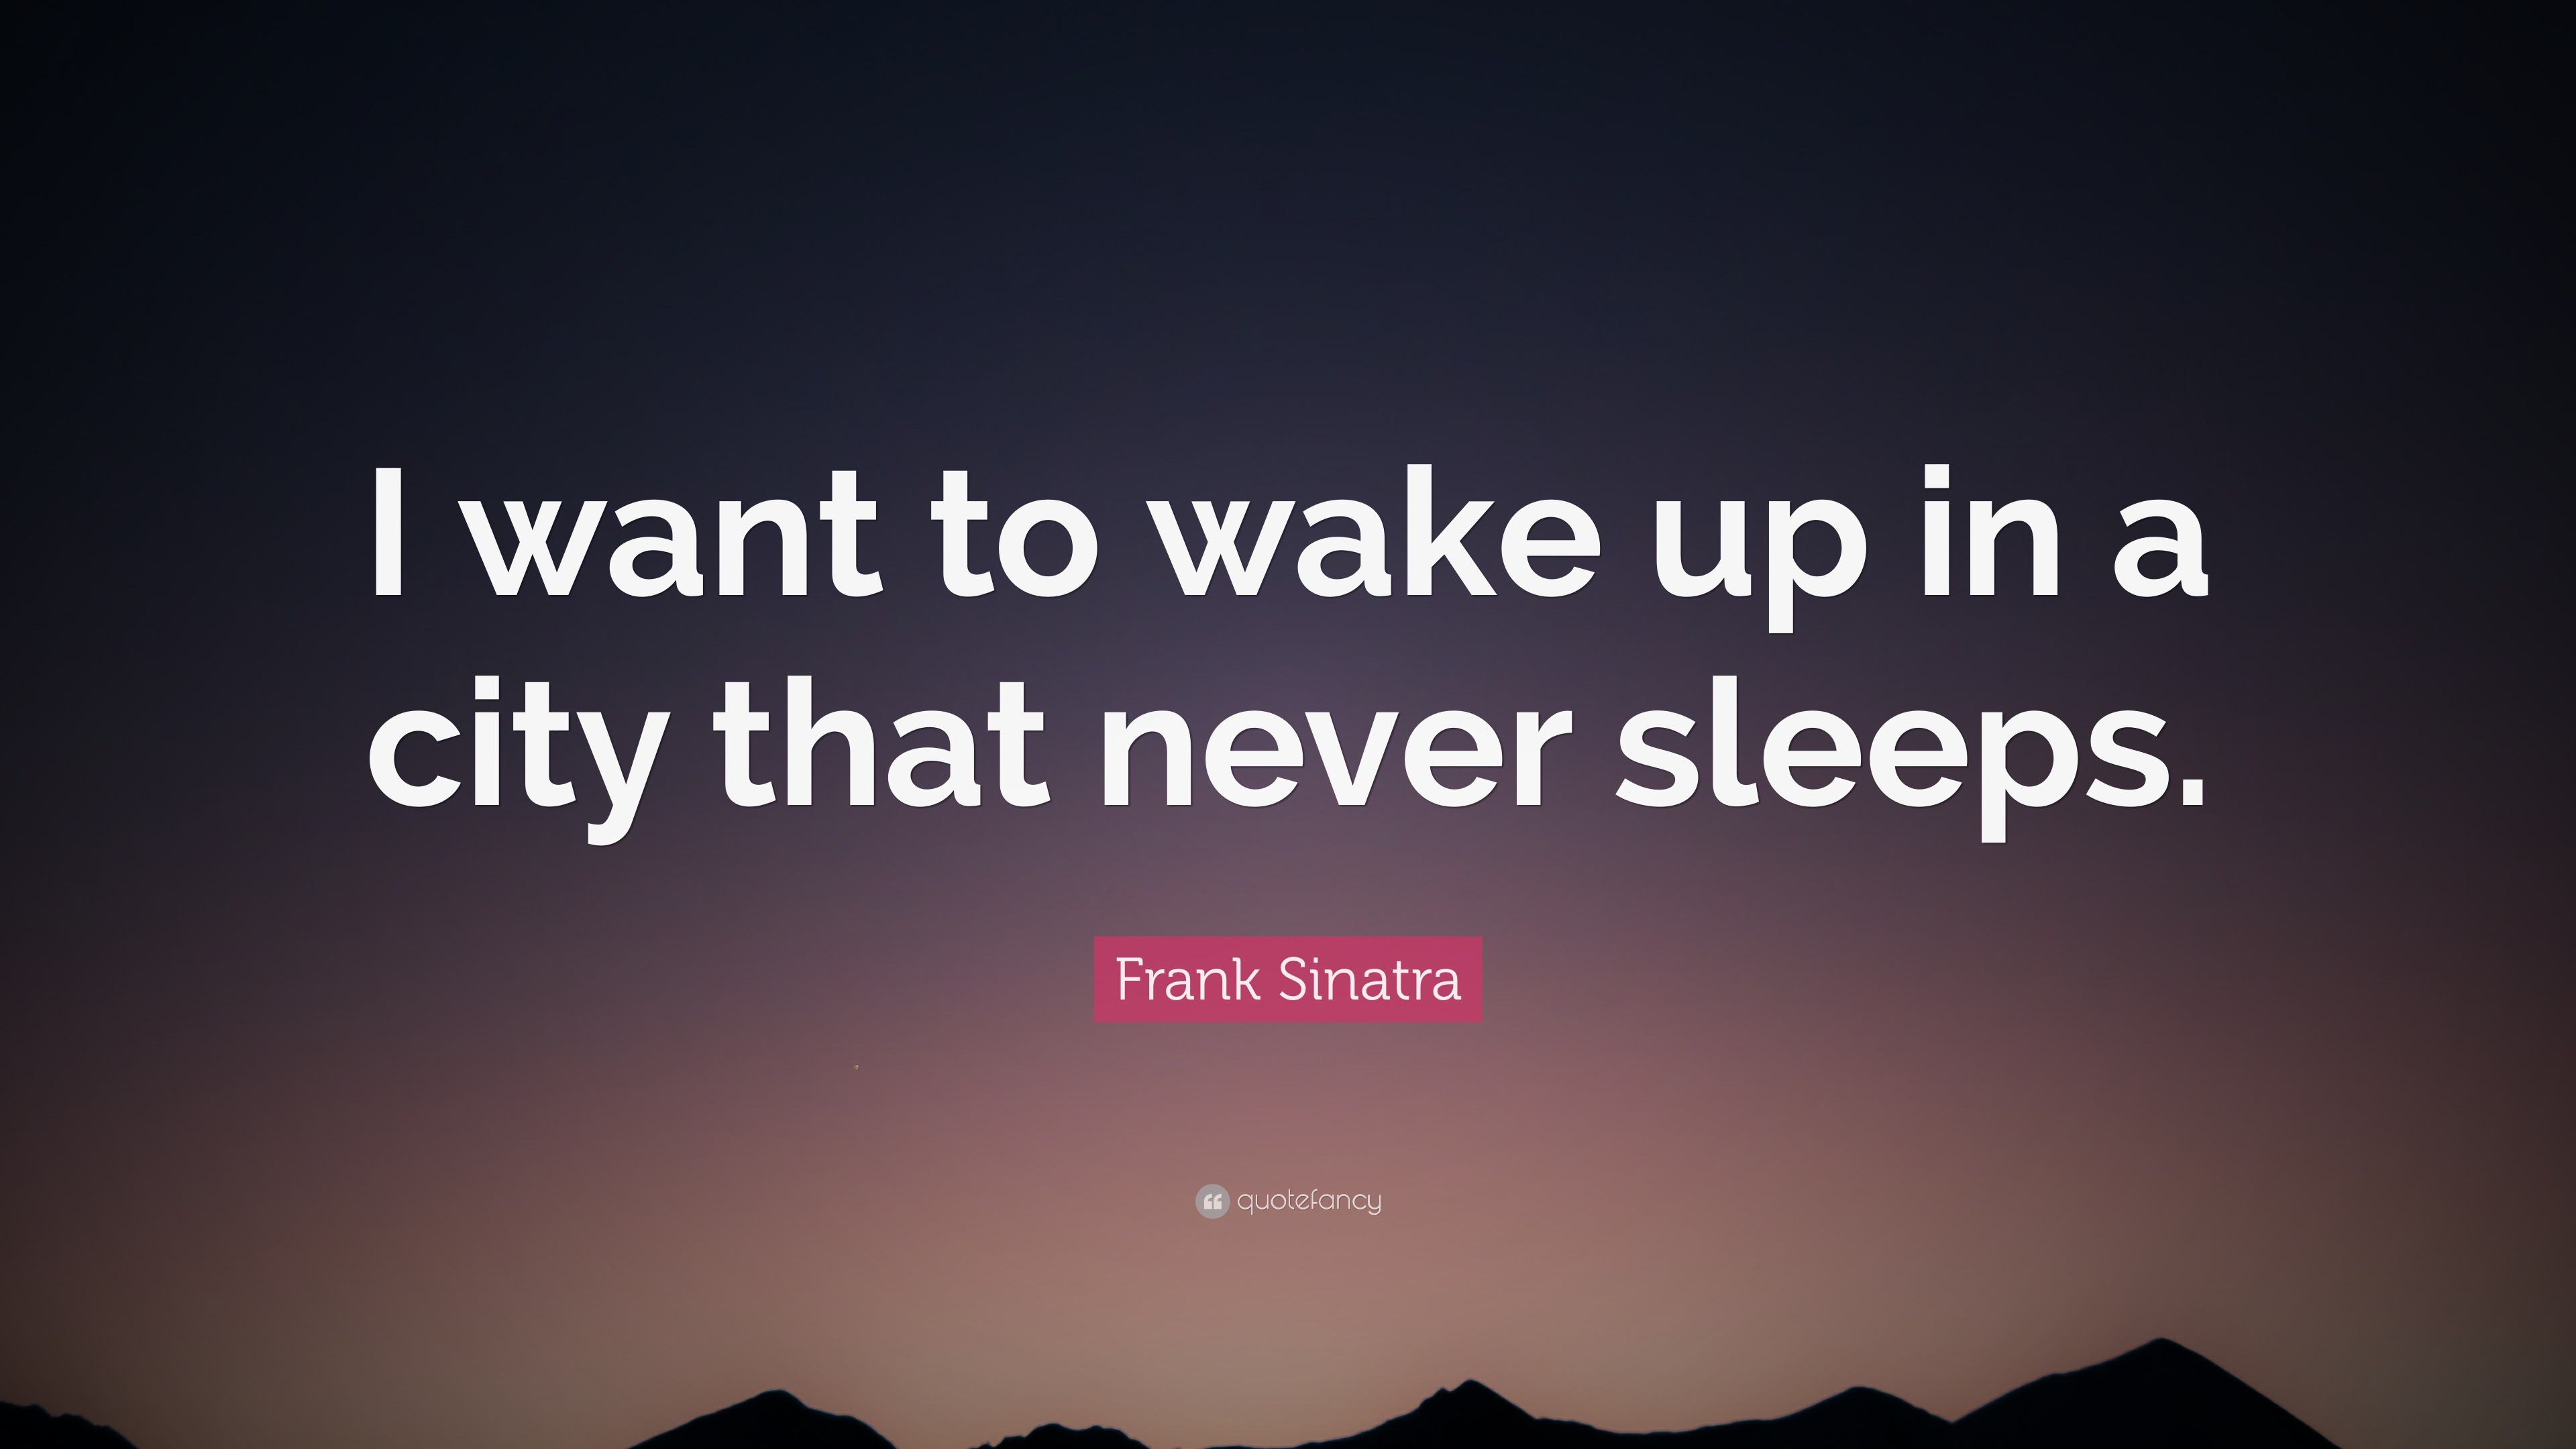 Frank Sinatra Quote: “I want to wake up in a city that never sleeps.”